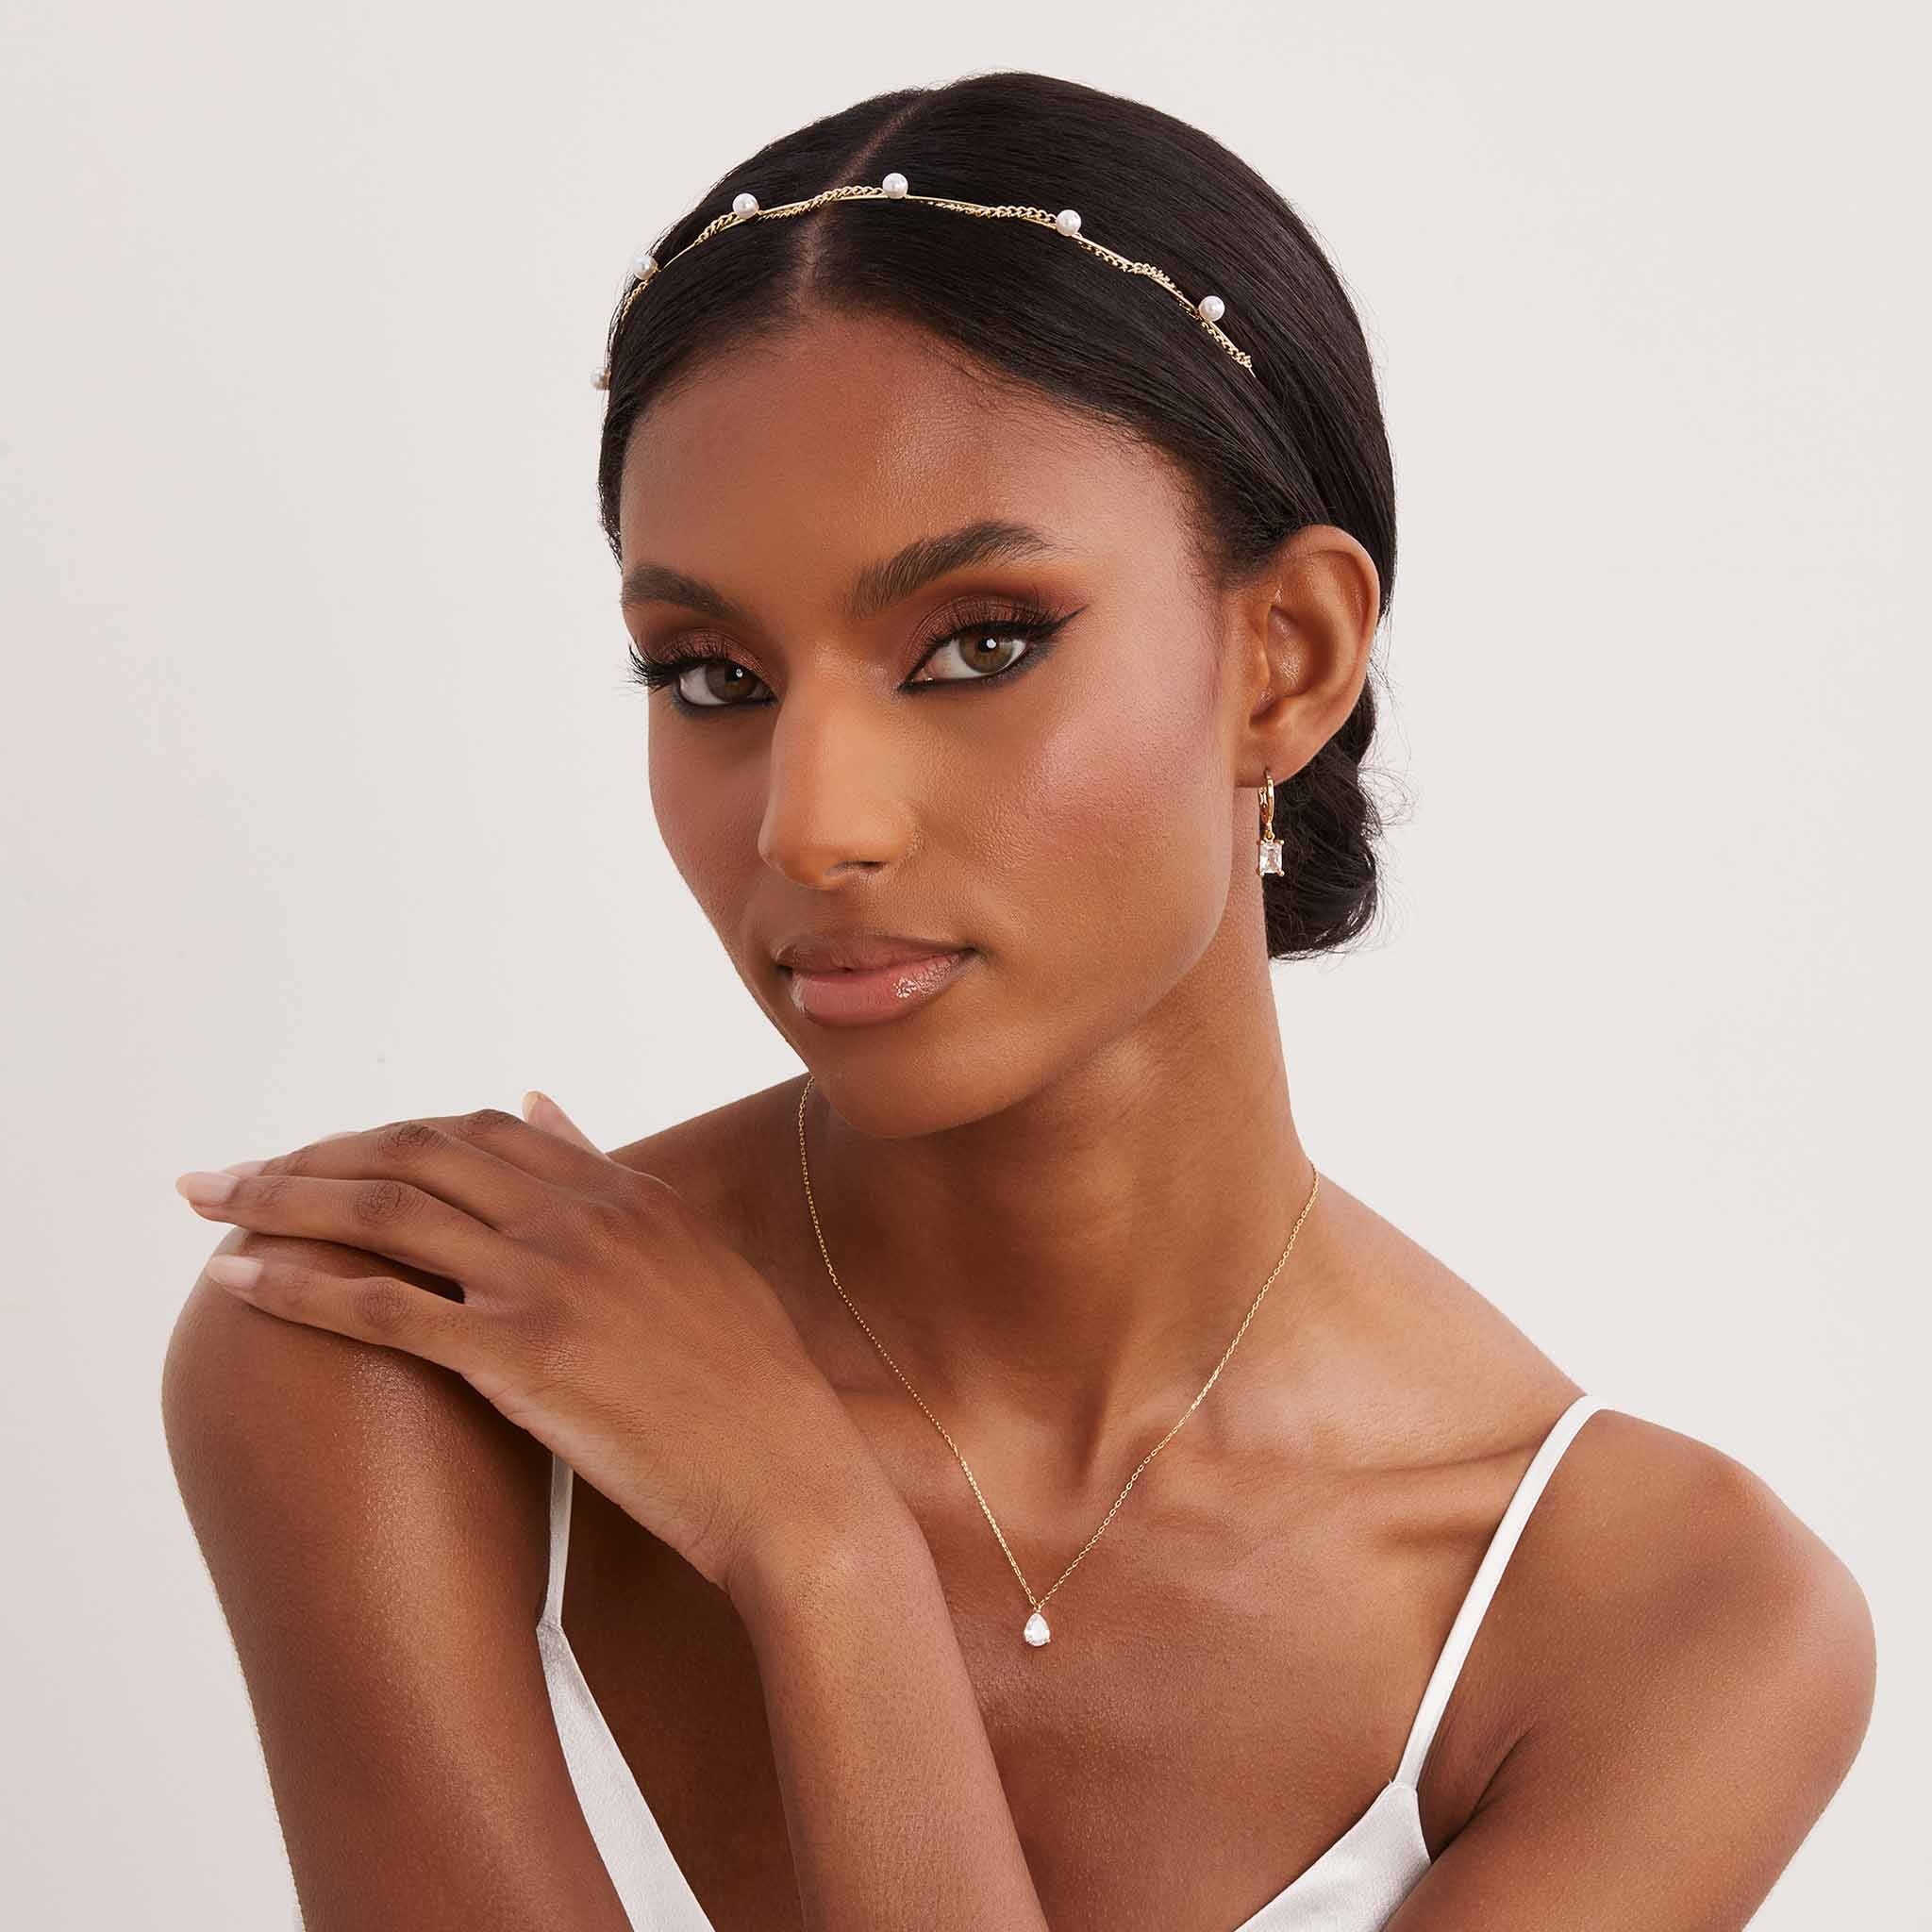 Gold Roussillon Pearl Headband by Birdy Grey